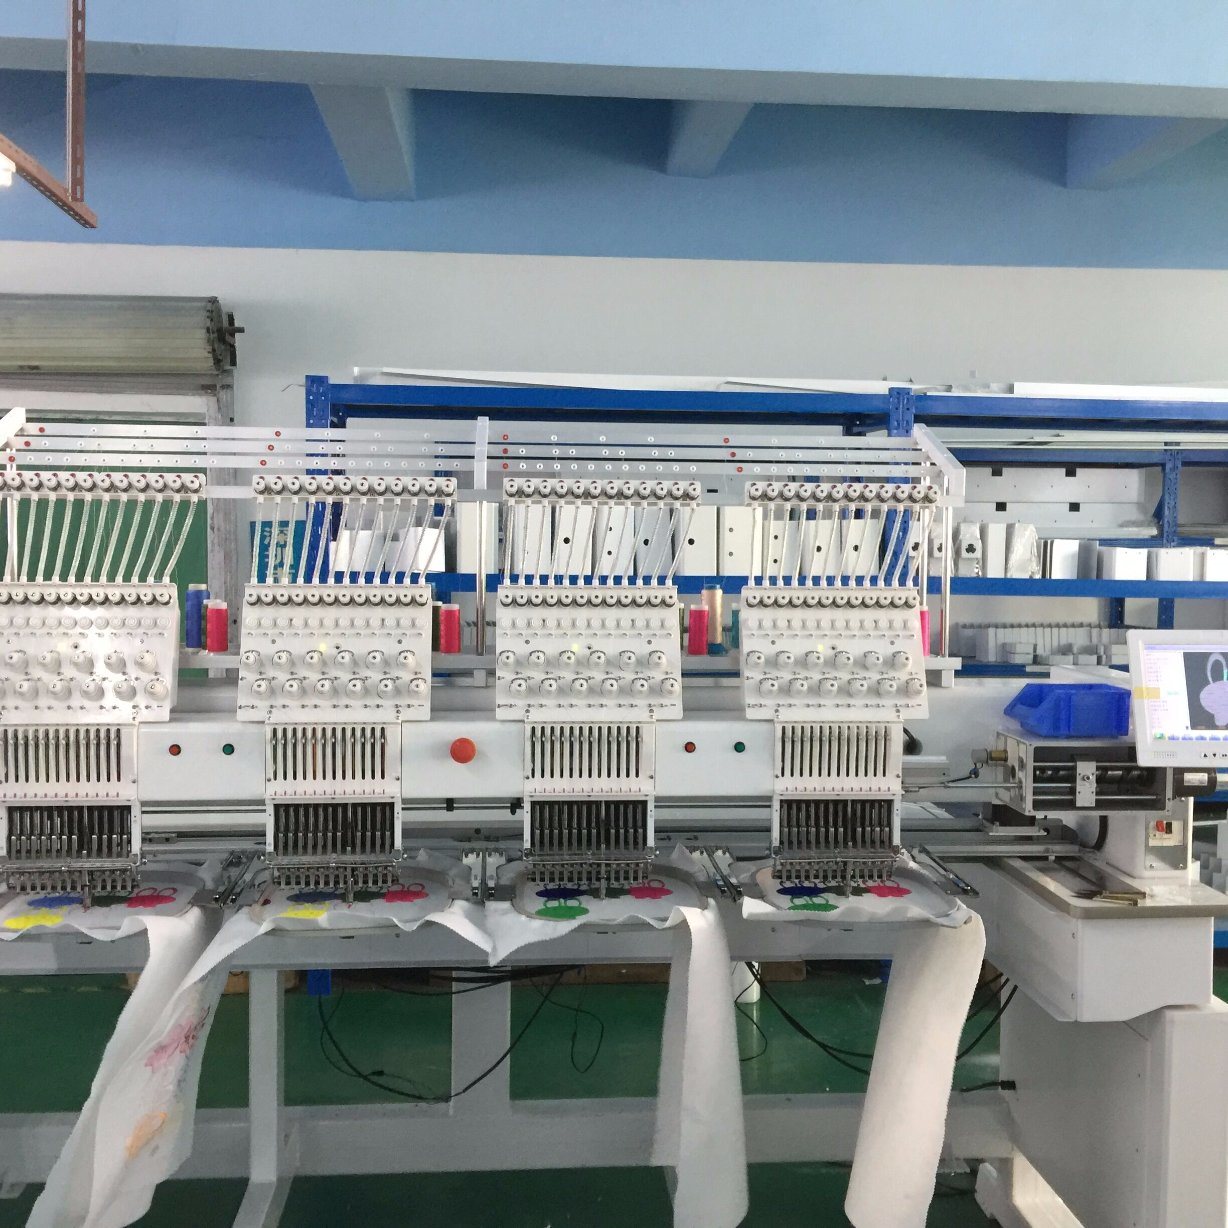 4 Head Commercial Embroidery Machines Come with Digitizing Software Wilcom